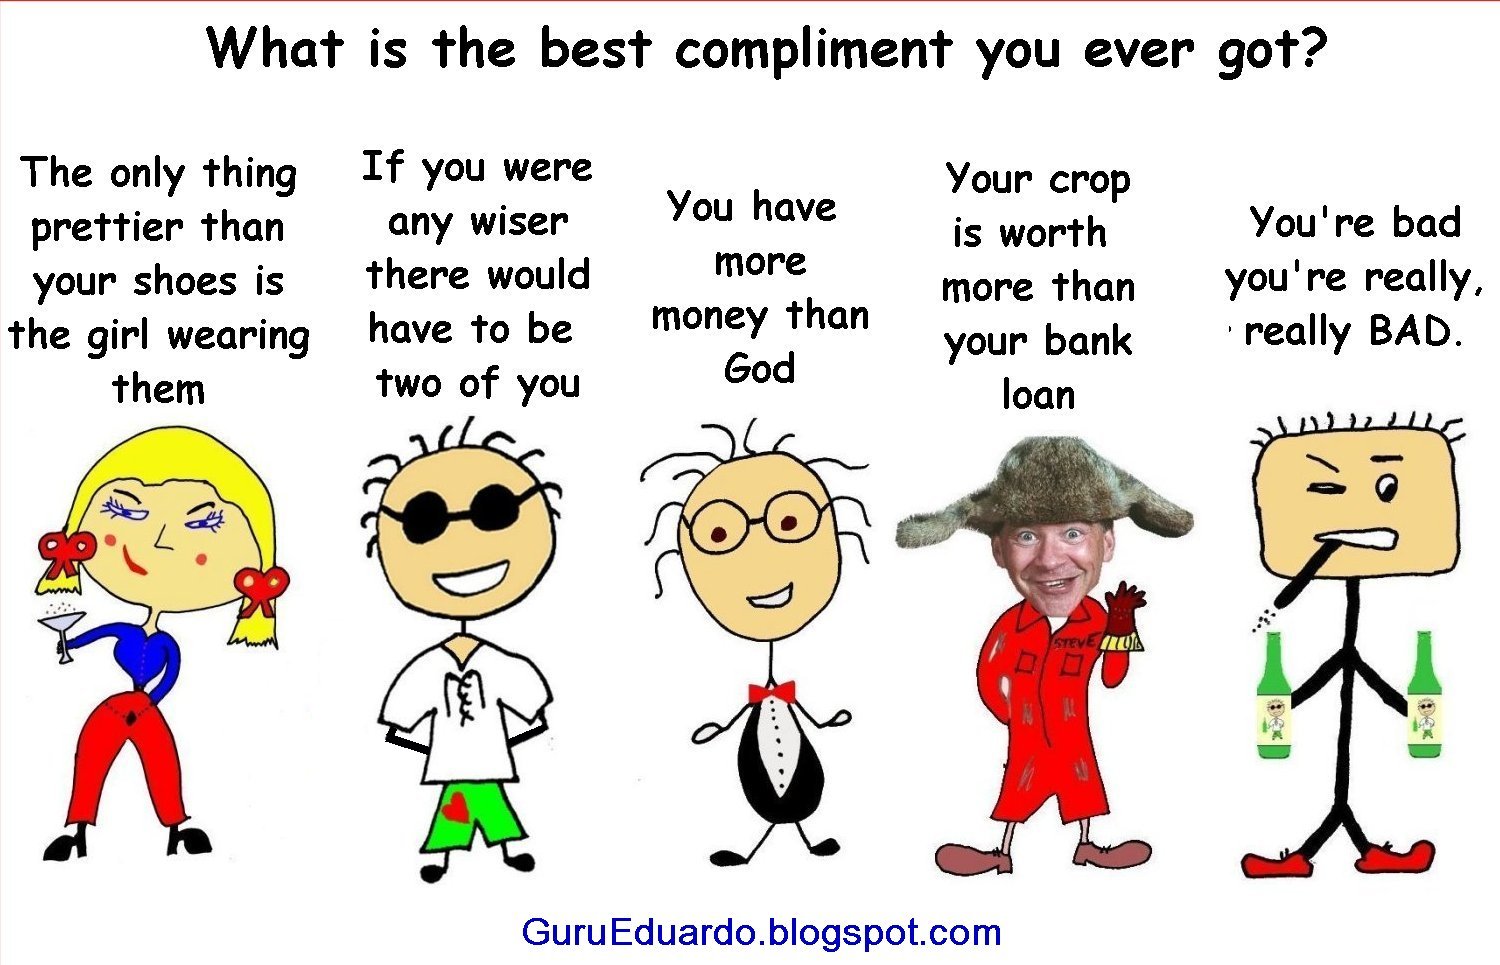 Secrets of Persuasion: 3 Best Ways To Use Compliments For Fun & Profits